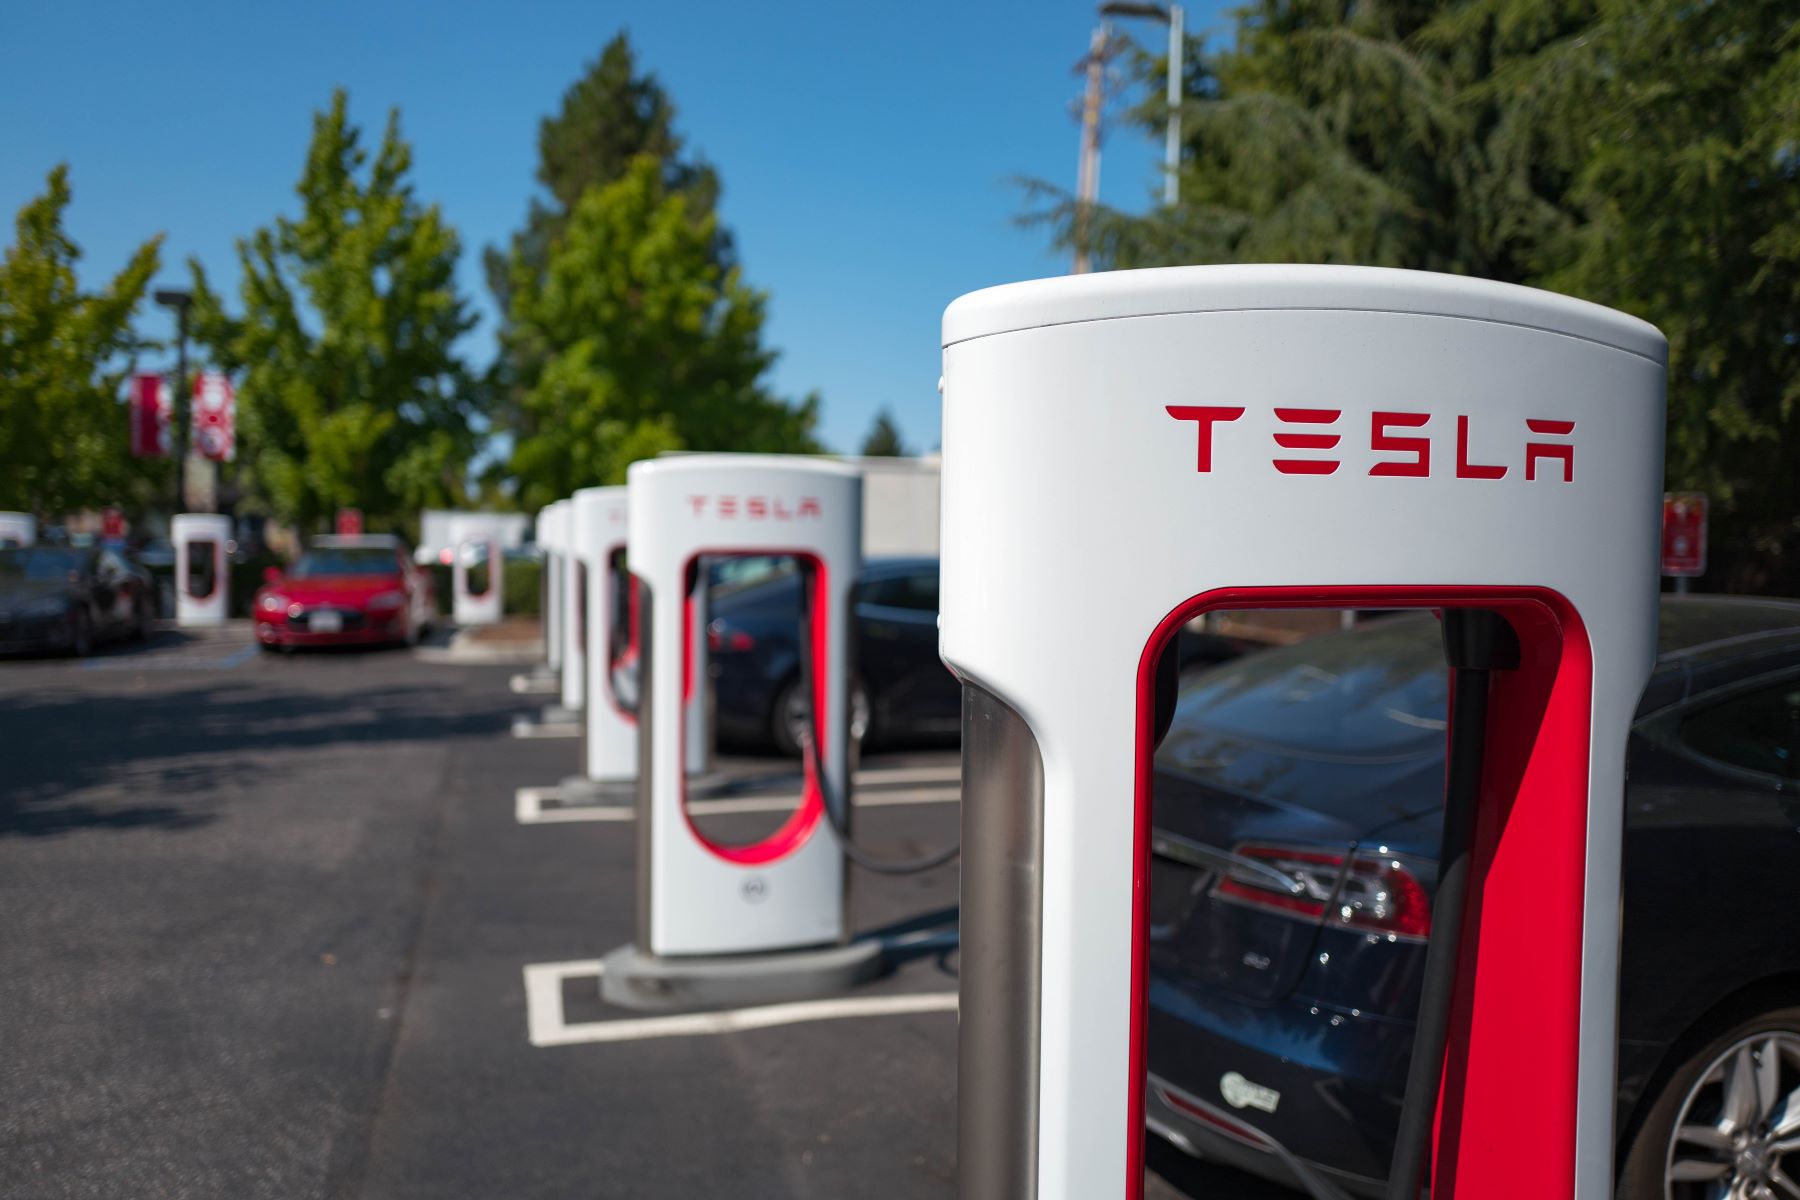 Tesla Superchargers in the parking lot of the Silicon Valley town of Mountain View, California